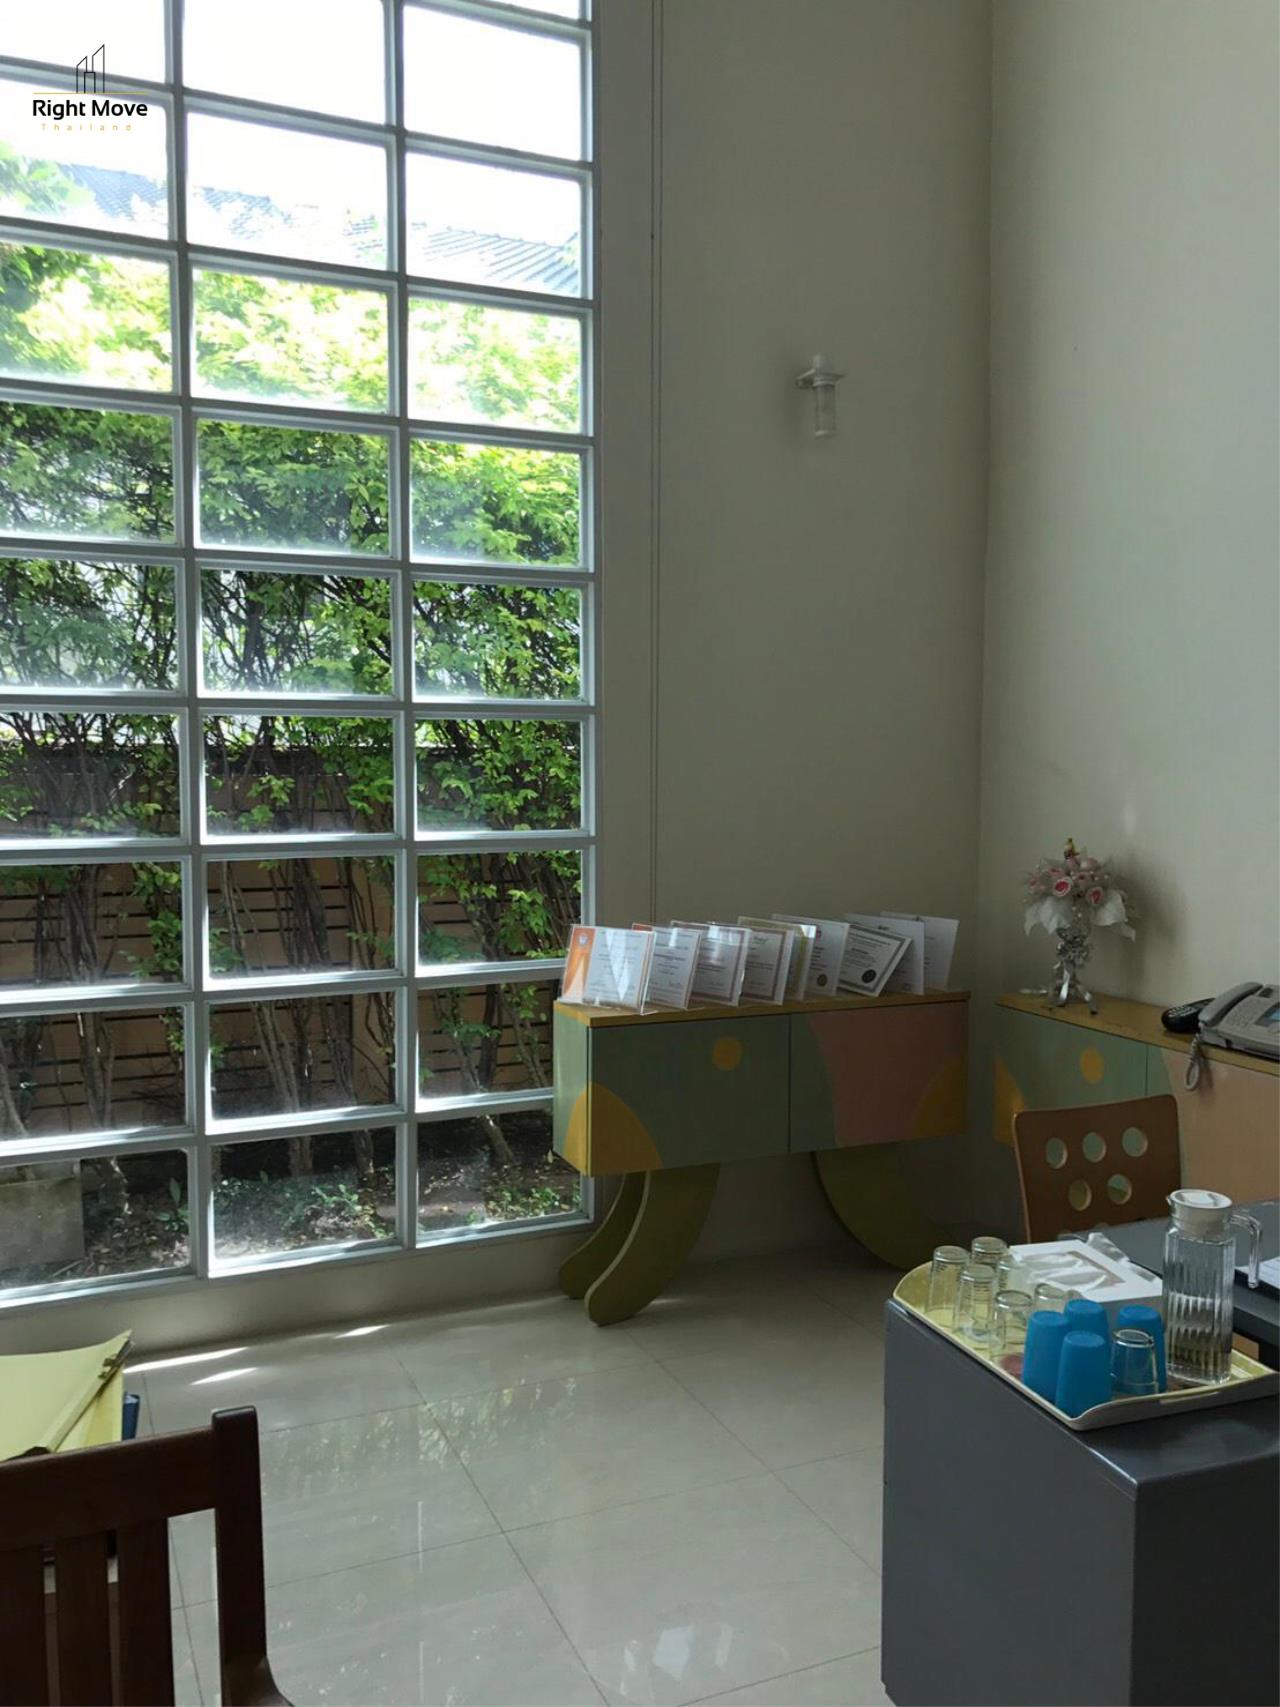 Right Move Thailand Agency's HR921 townhouse for sale - 39,000,000THB - 3 Bedrooms - 600 sqm. 3